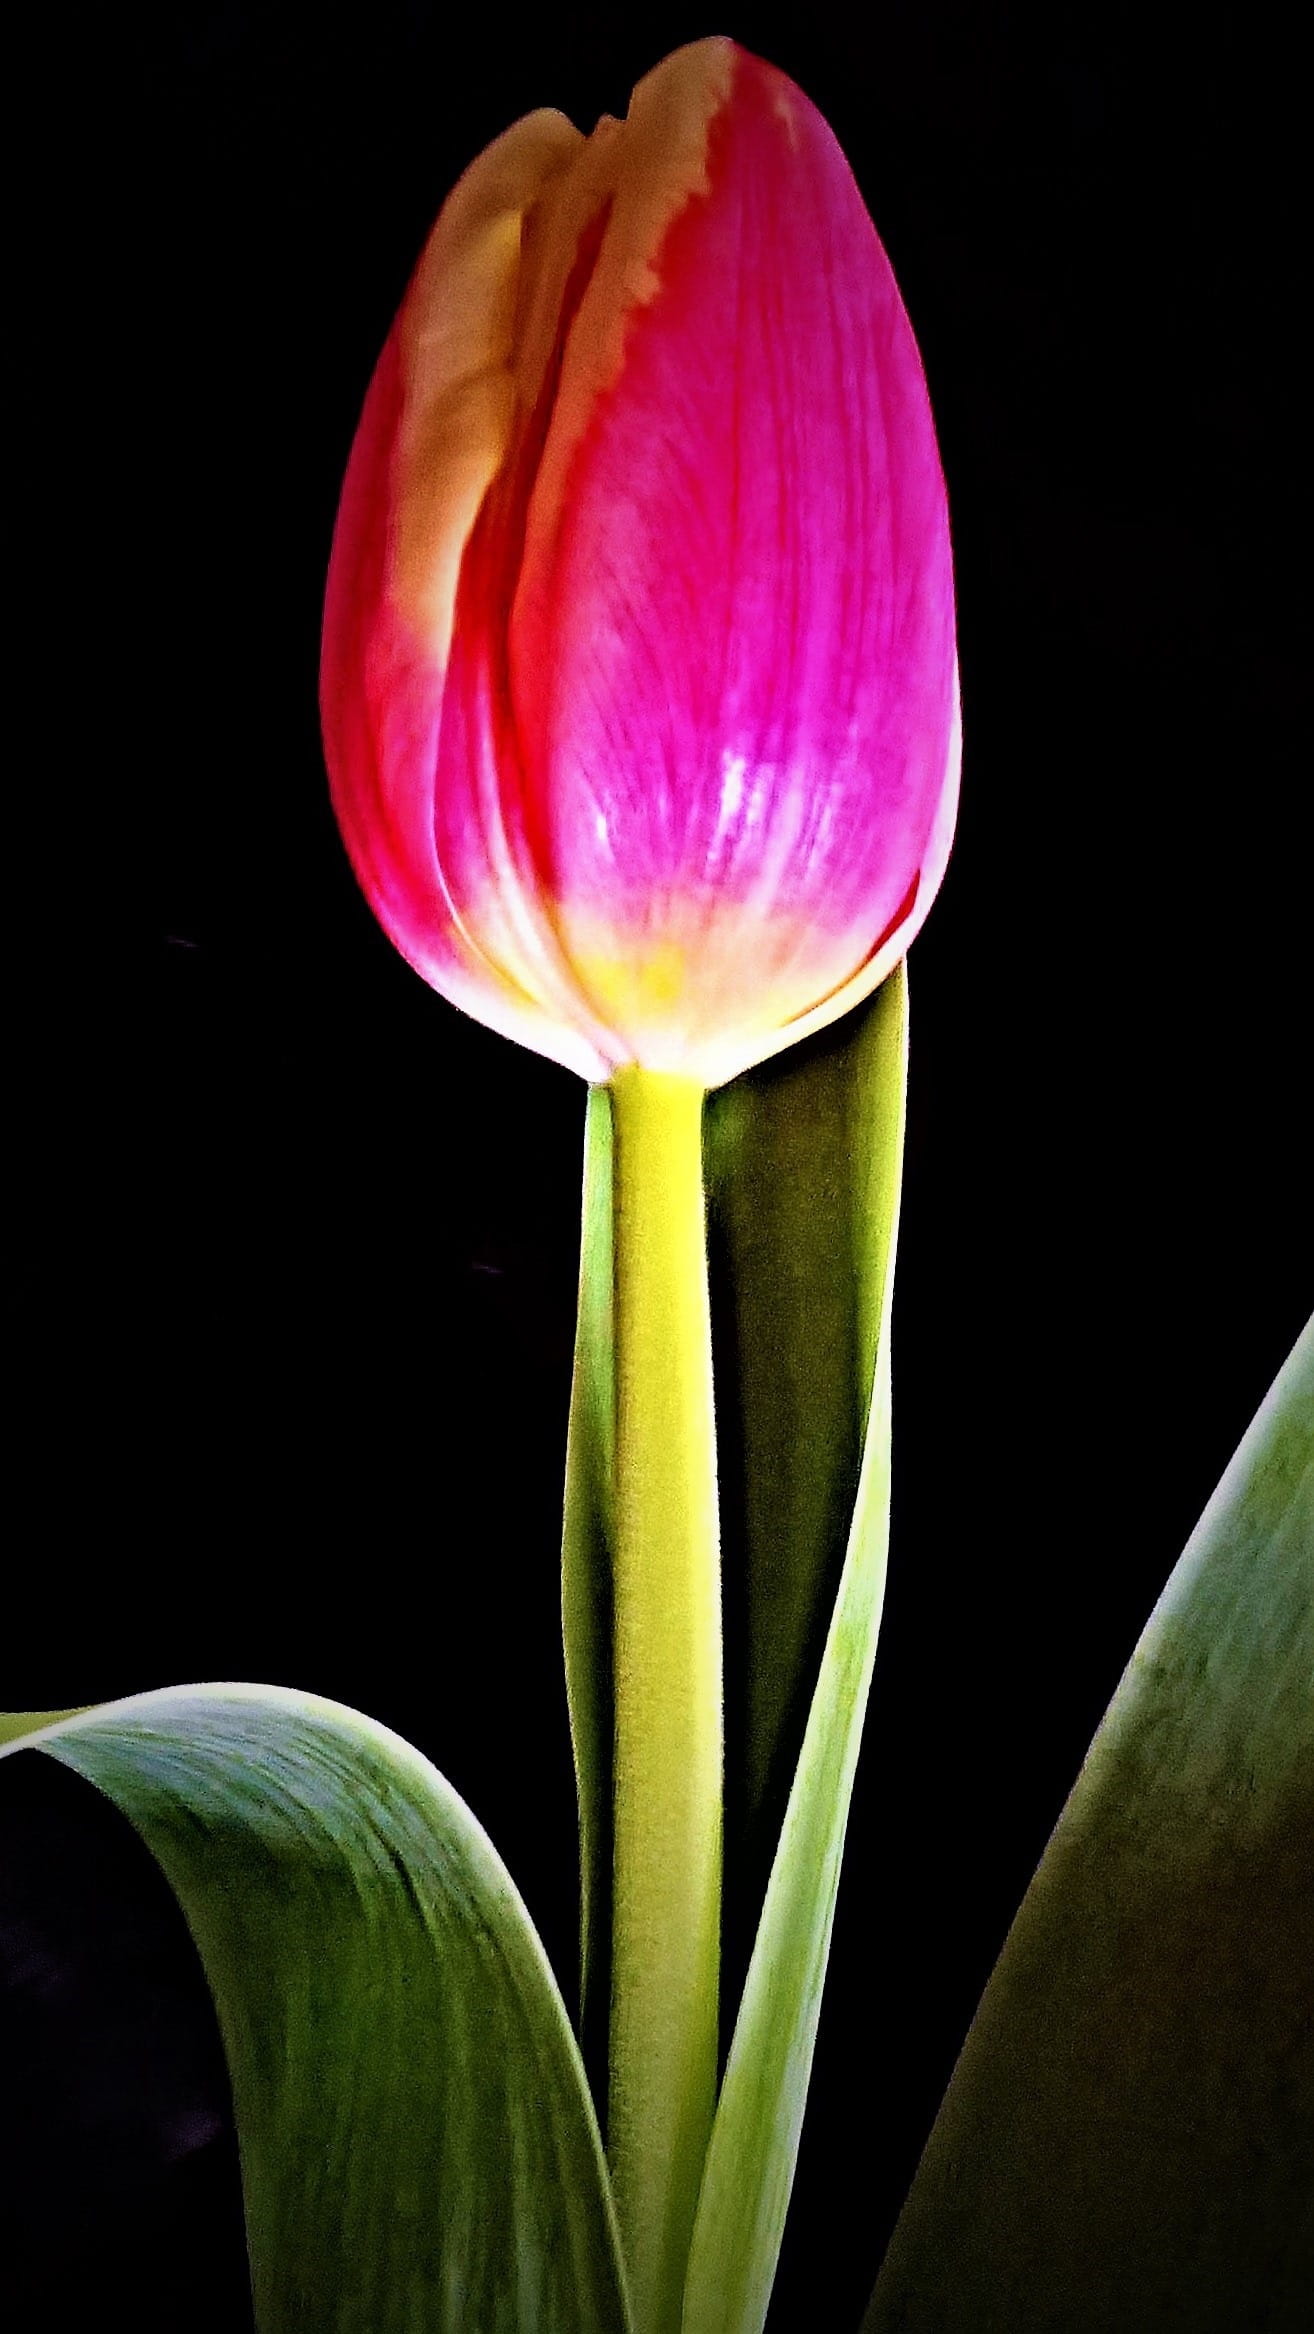 pink Tulip flower close-up photography, single bloom, yellow